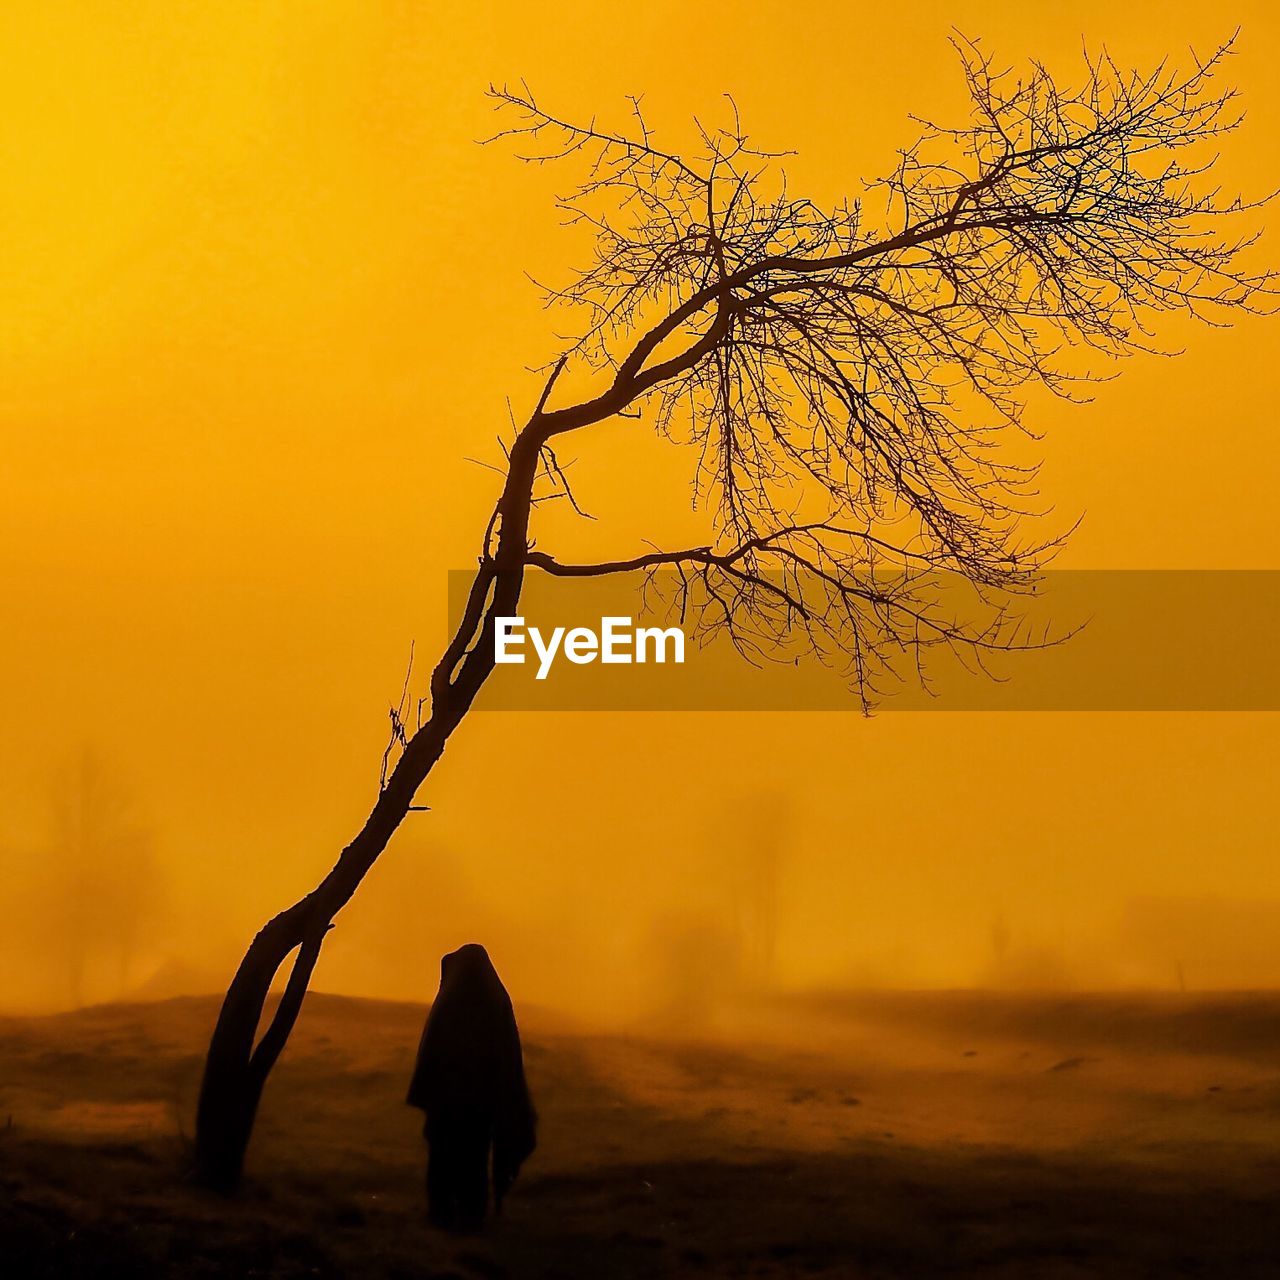 Silhouette person standing by bare tree on field against orange sky